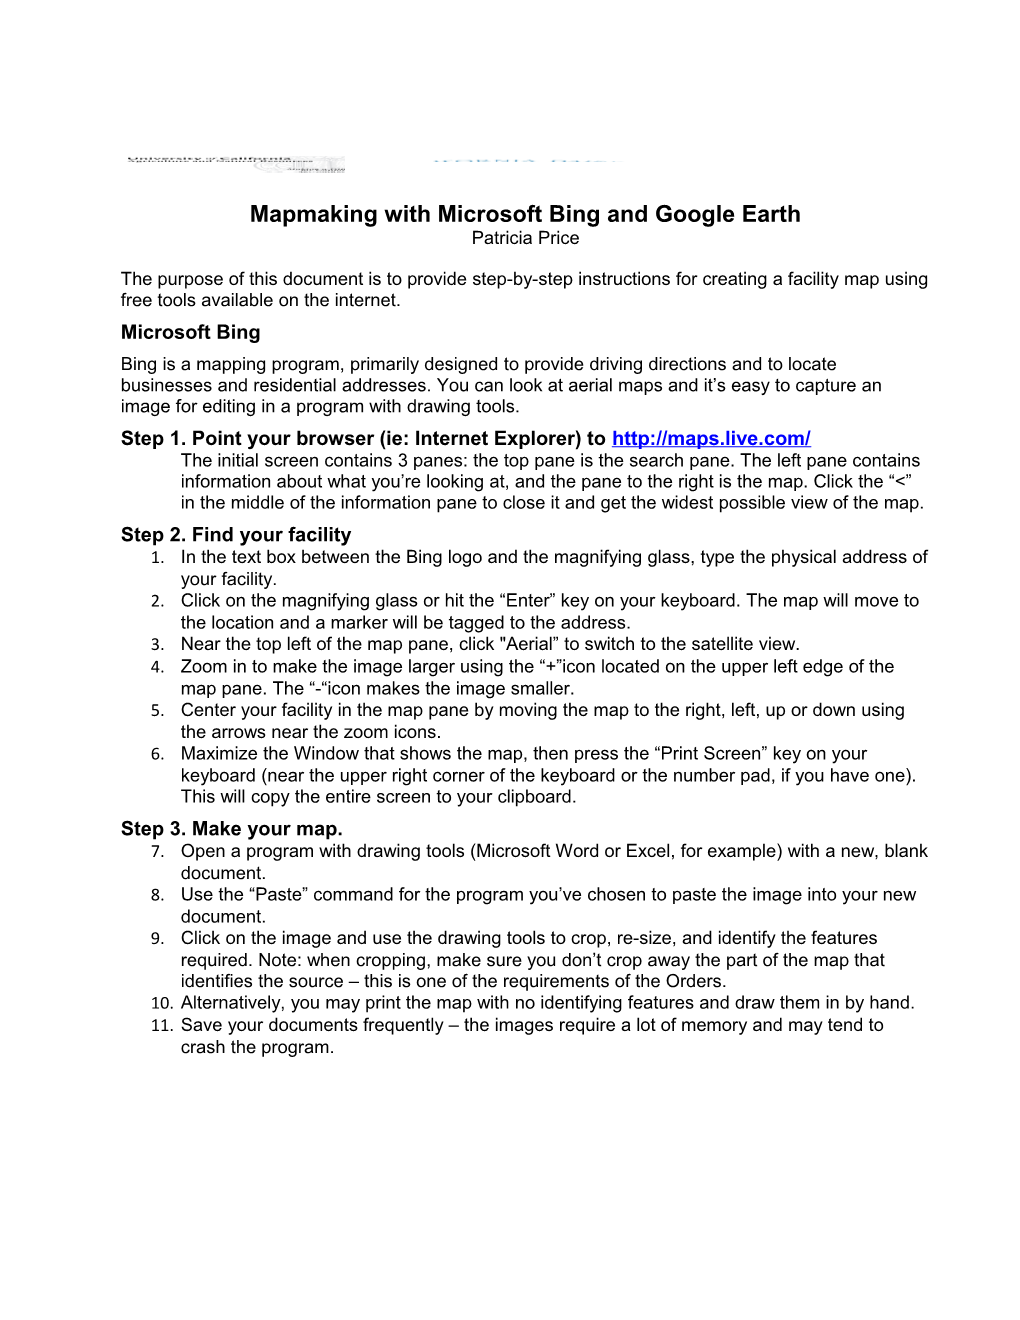 Mapmaking with Microsoft Bing and Google Earth